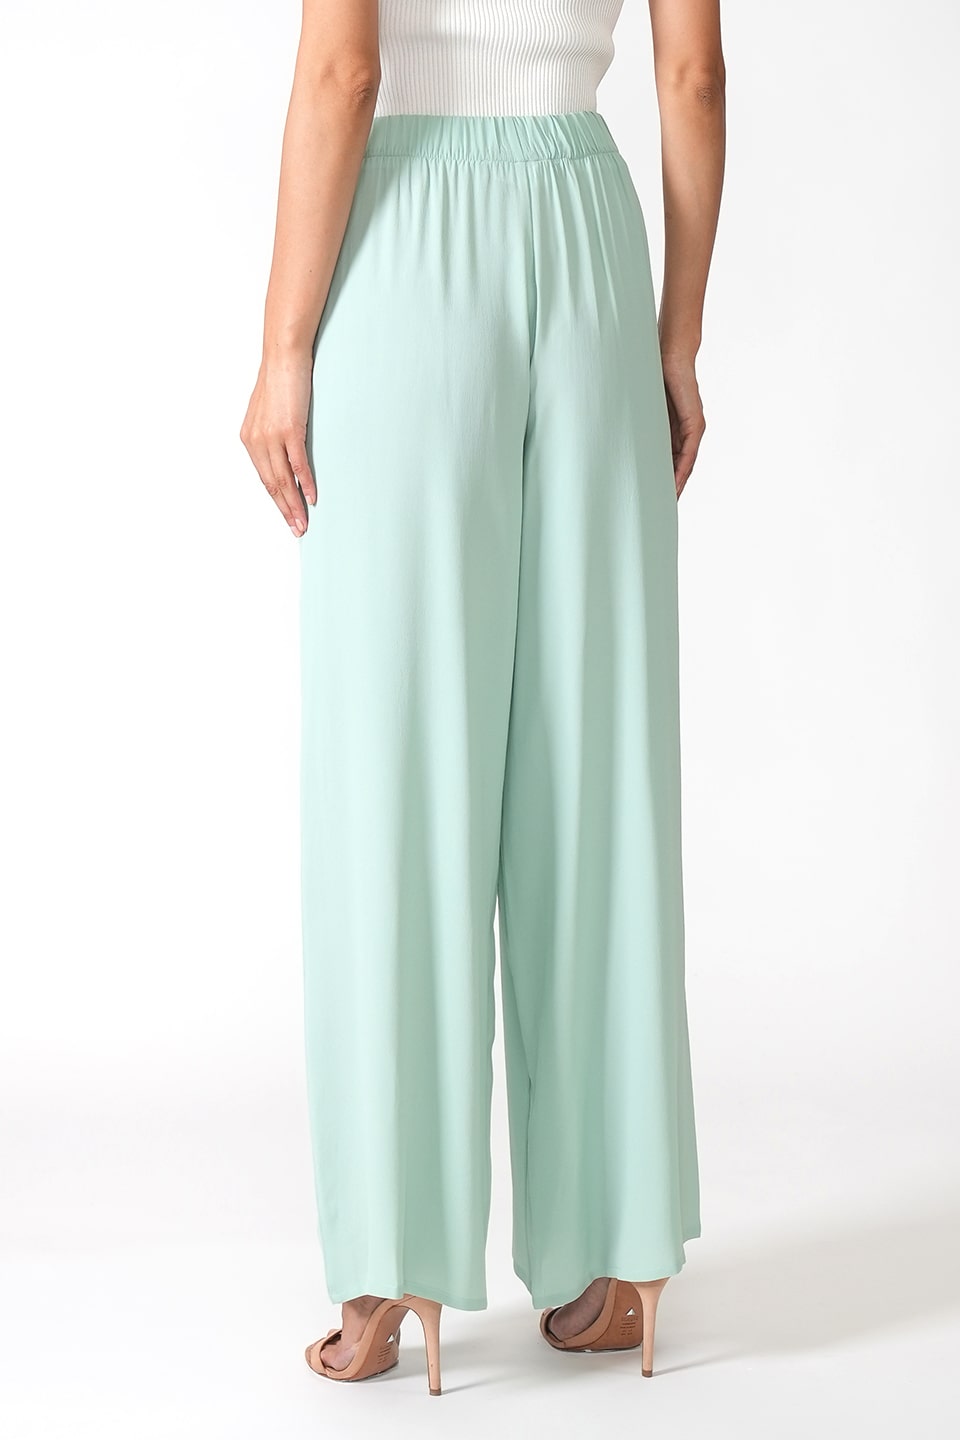 Designer Green Women pants, shop online with free delivery in UAE. Product gallery 6